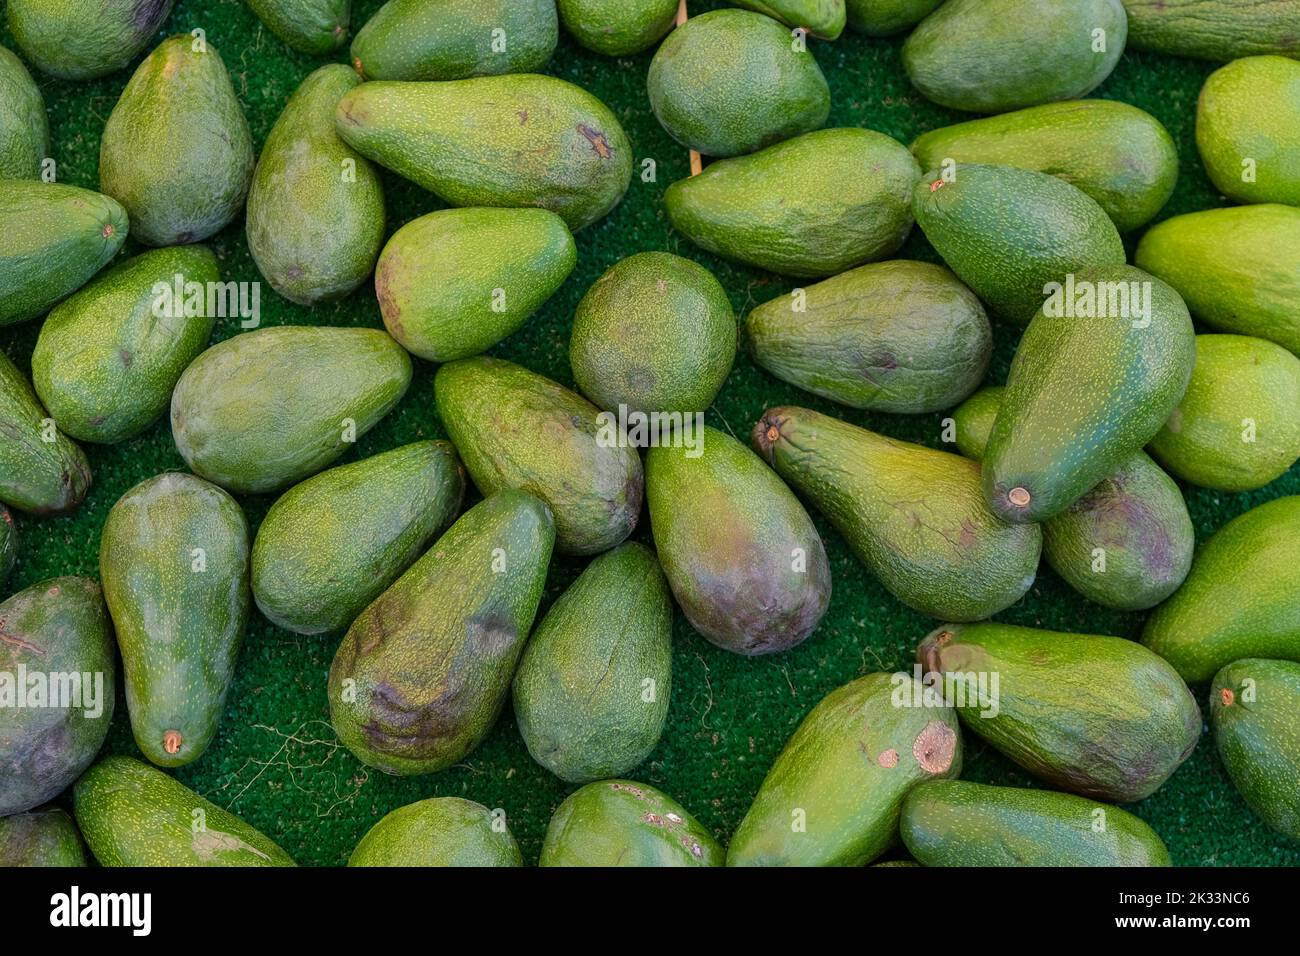 Top view of a bunch of green organic avocado fruits in the market, copy space. Stock Photo